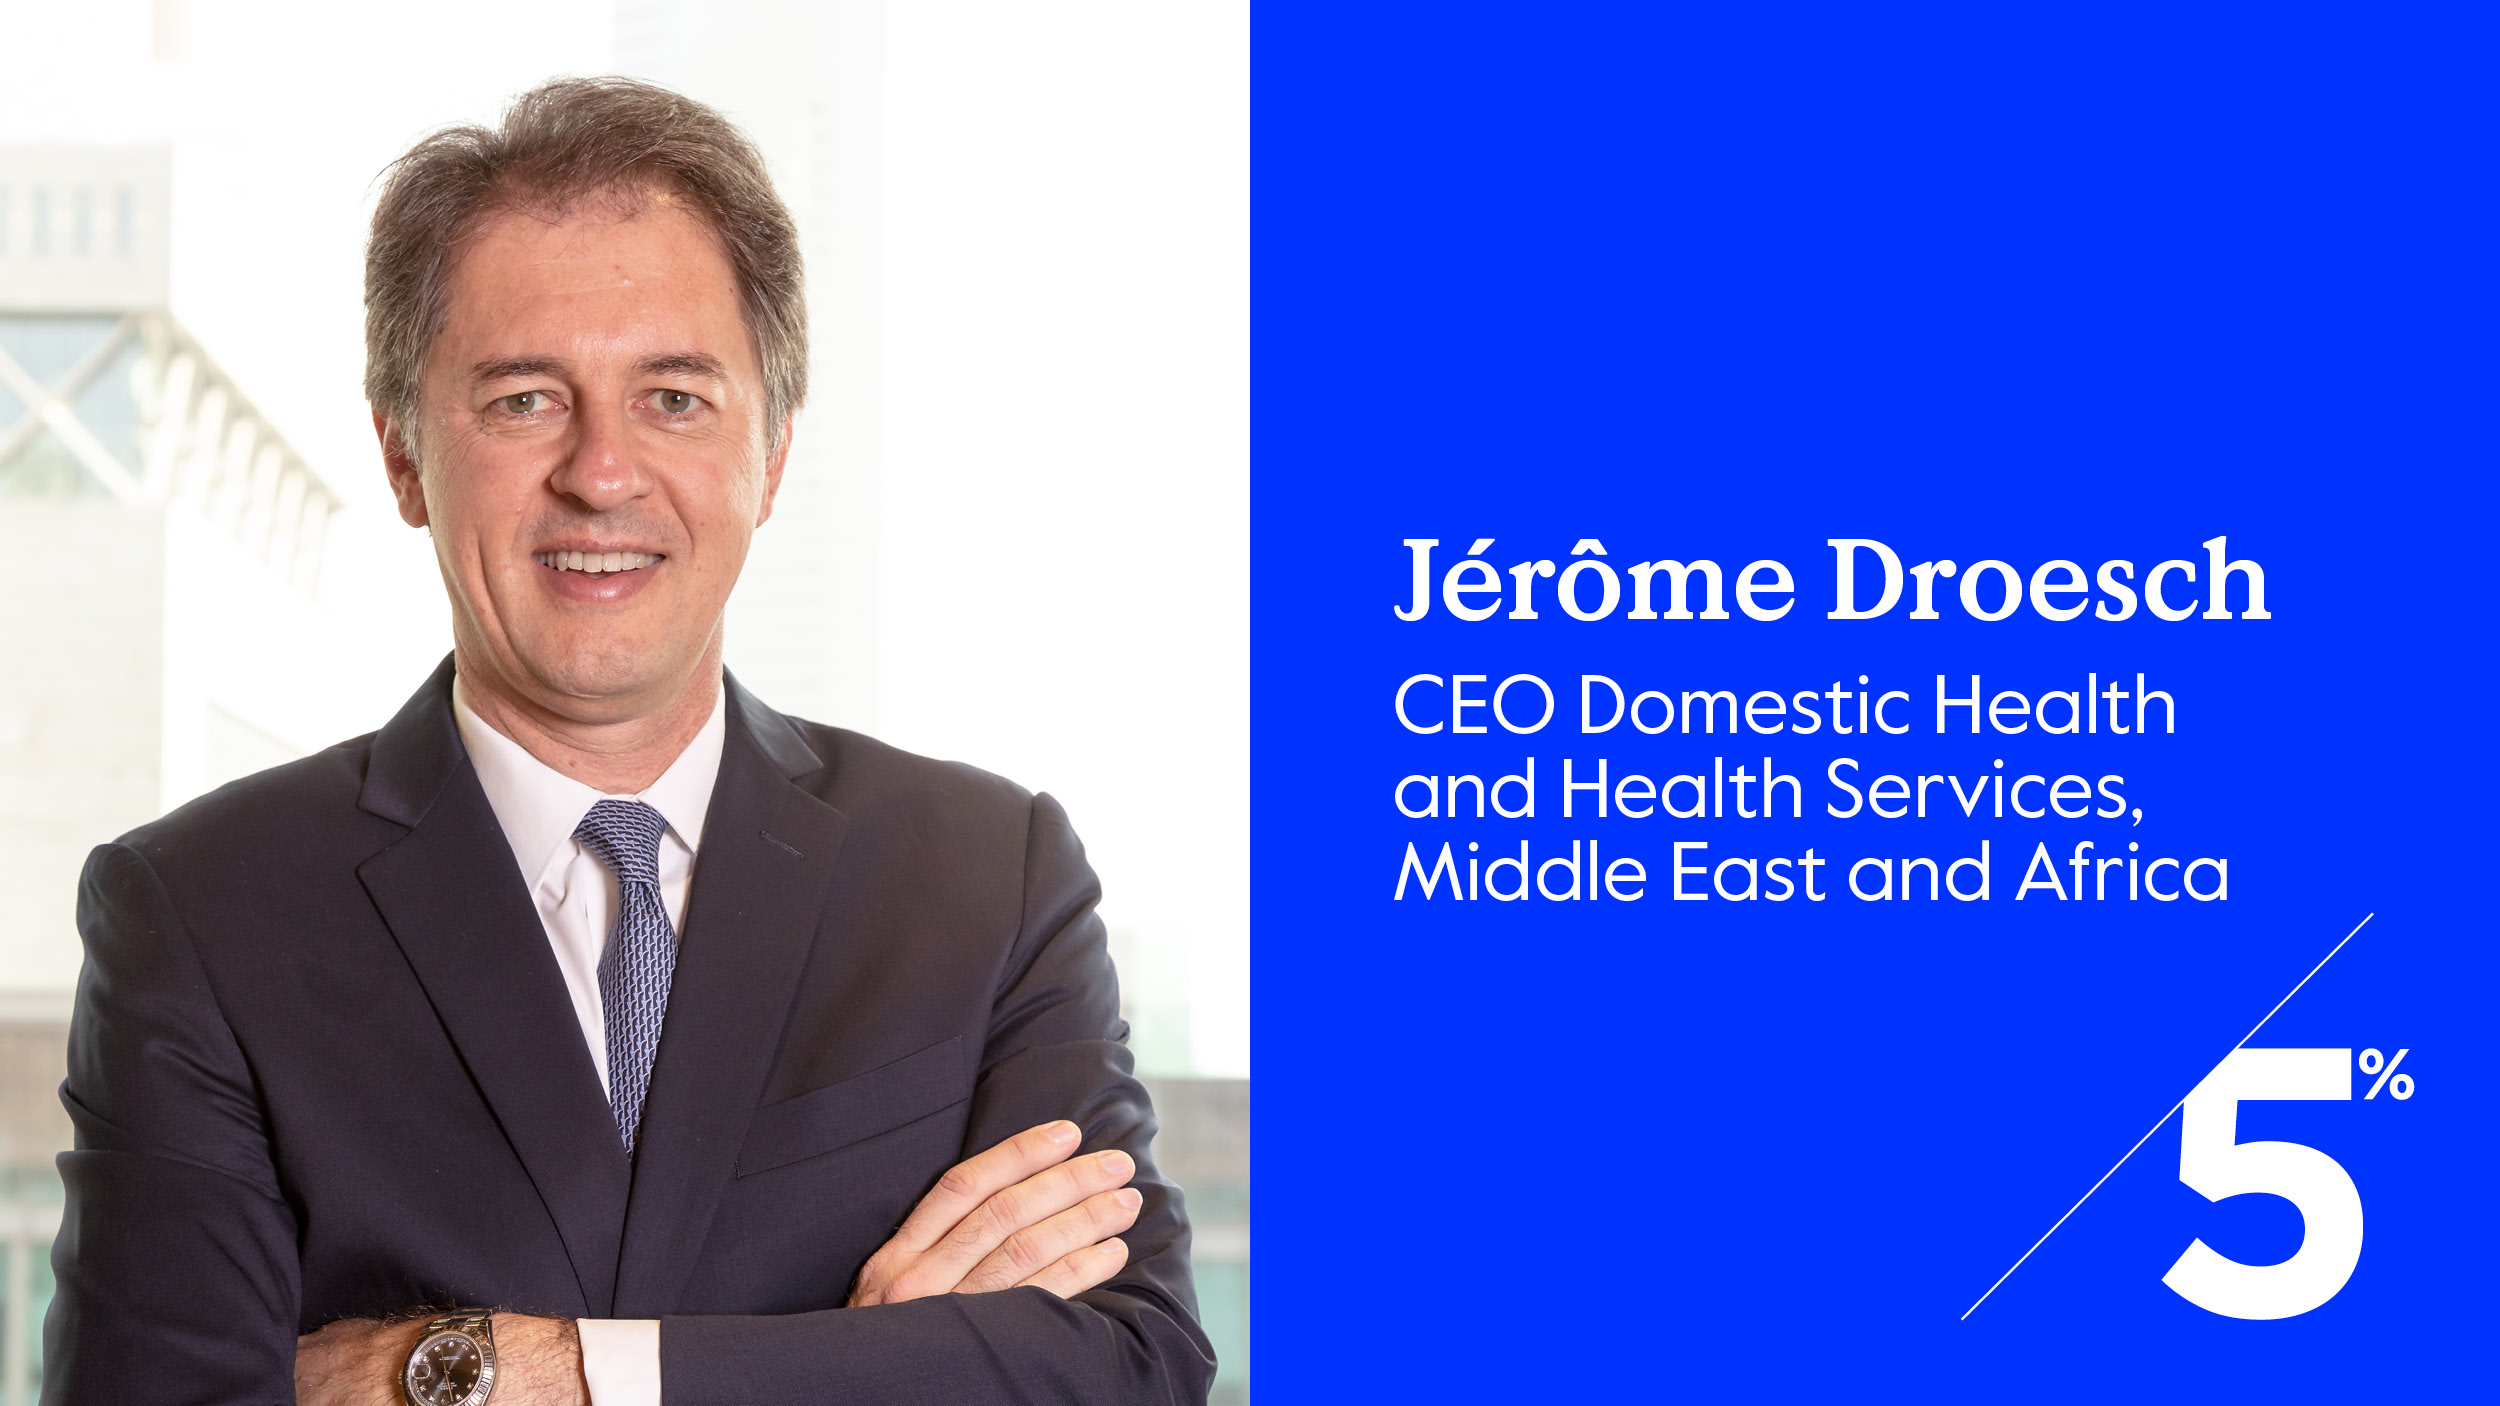 Jerome Droesch, CEO Domestic Health and Health Services